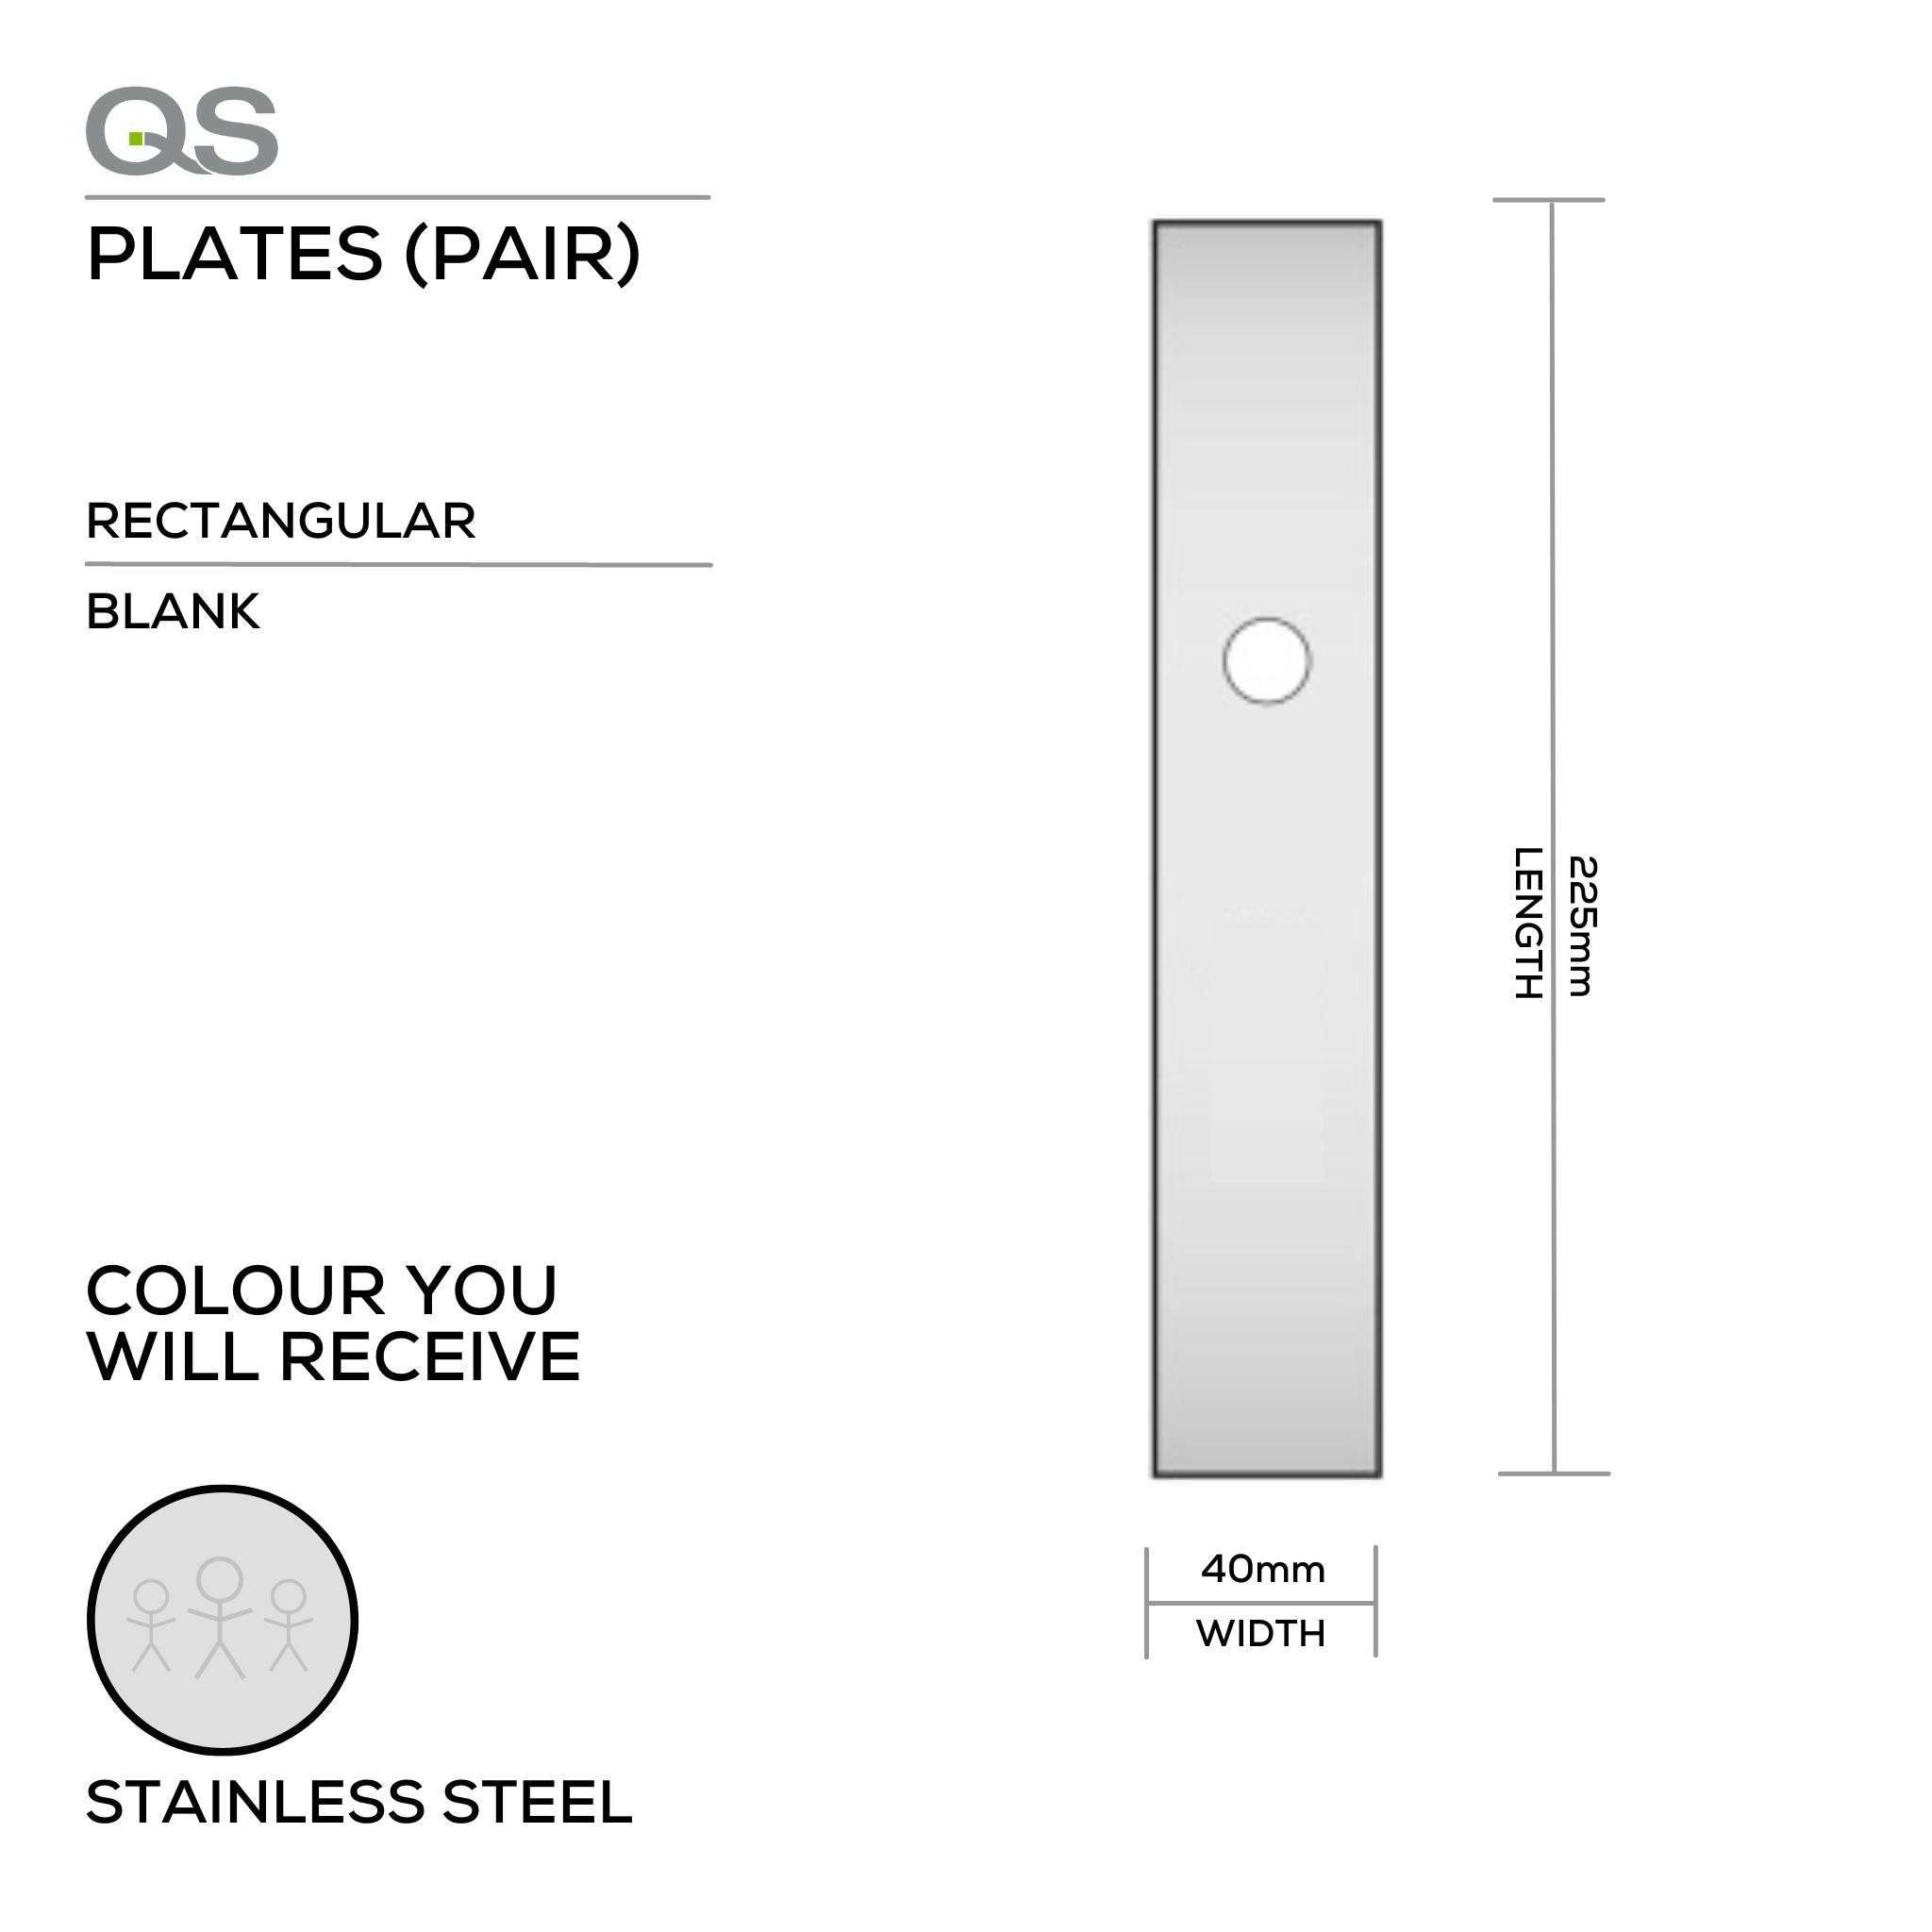 QS4429 BLANK, Plate, Rectangular, 225mm (l) x 40mm (w), Supplied without QS Handle, Stainless Steel, QS